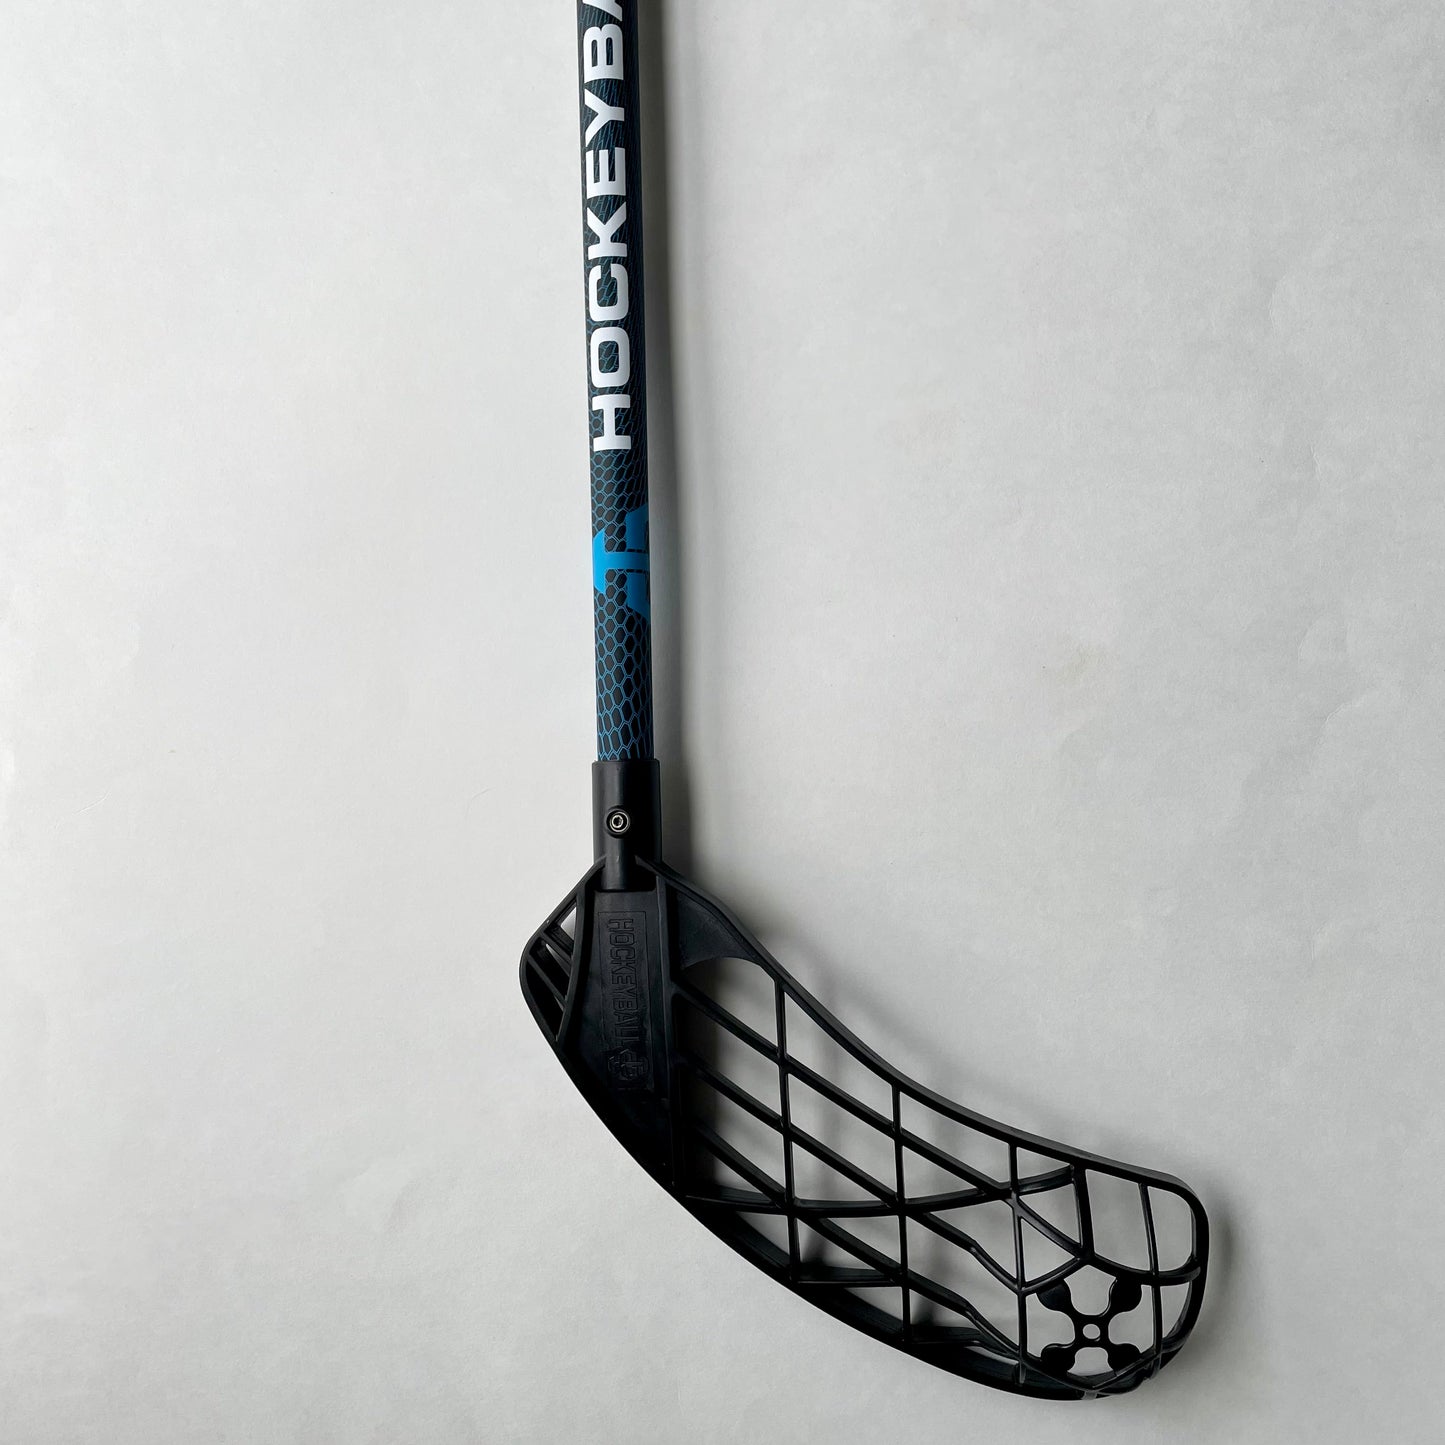 Hockeyball kinetic-shaft stick topdown view